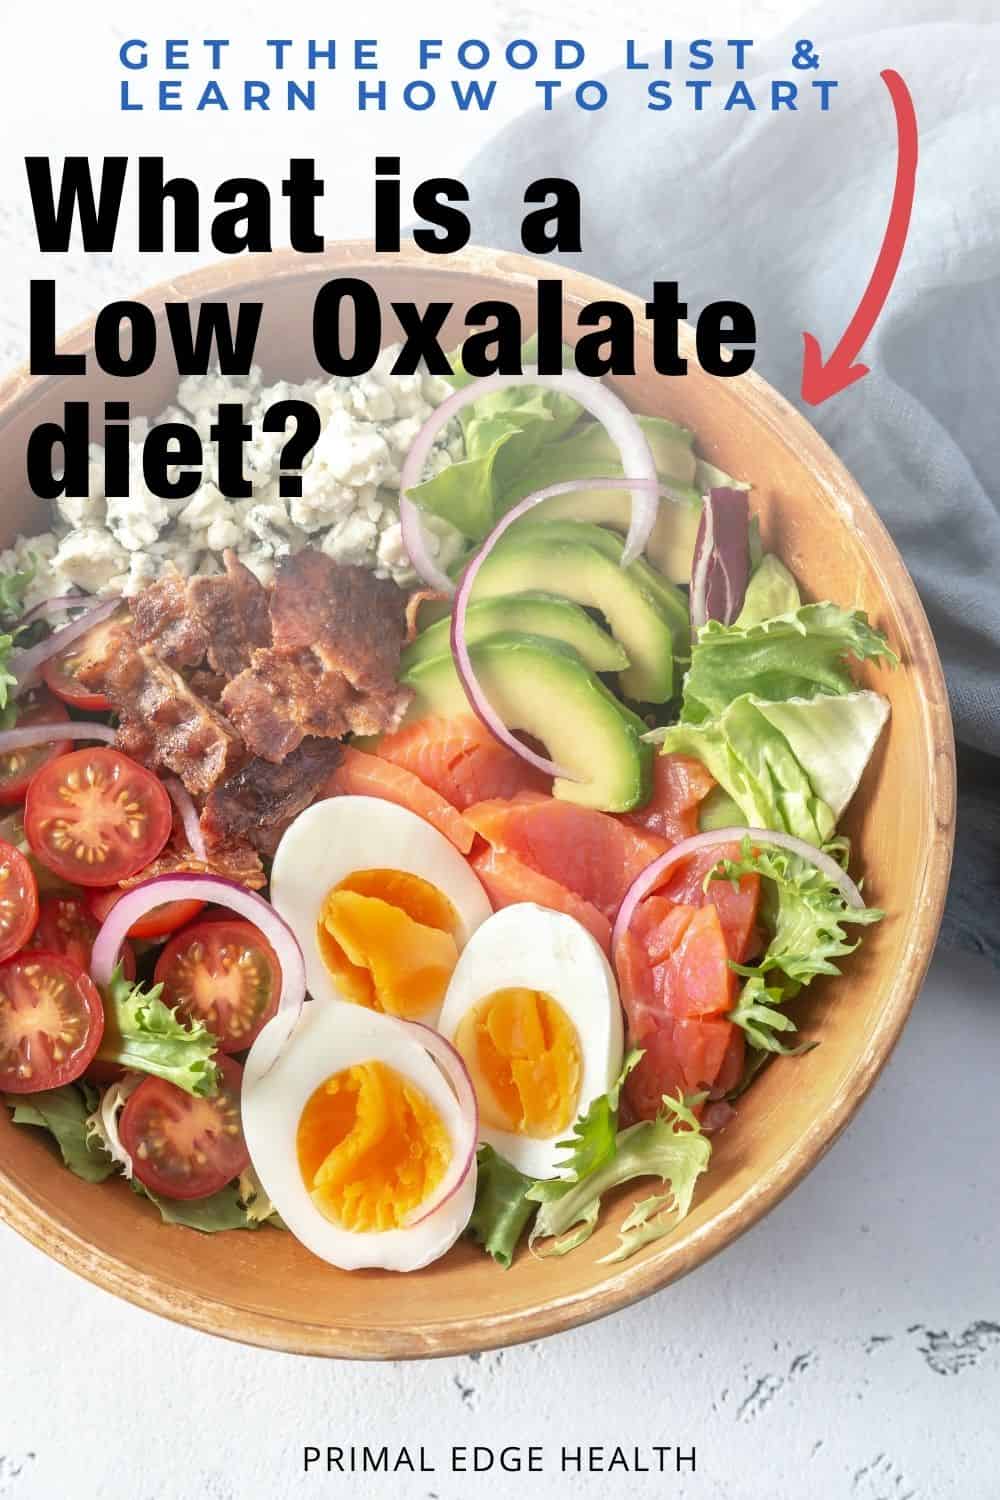 What is a Low Oxalate Diet?